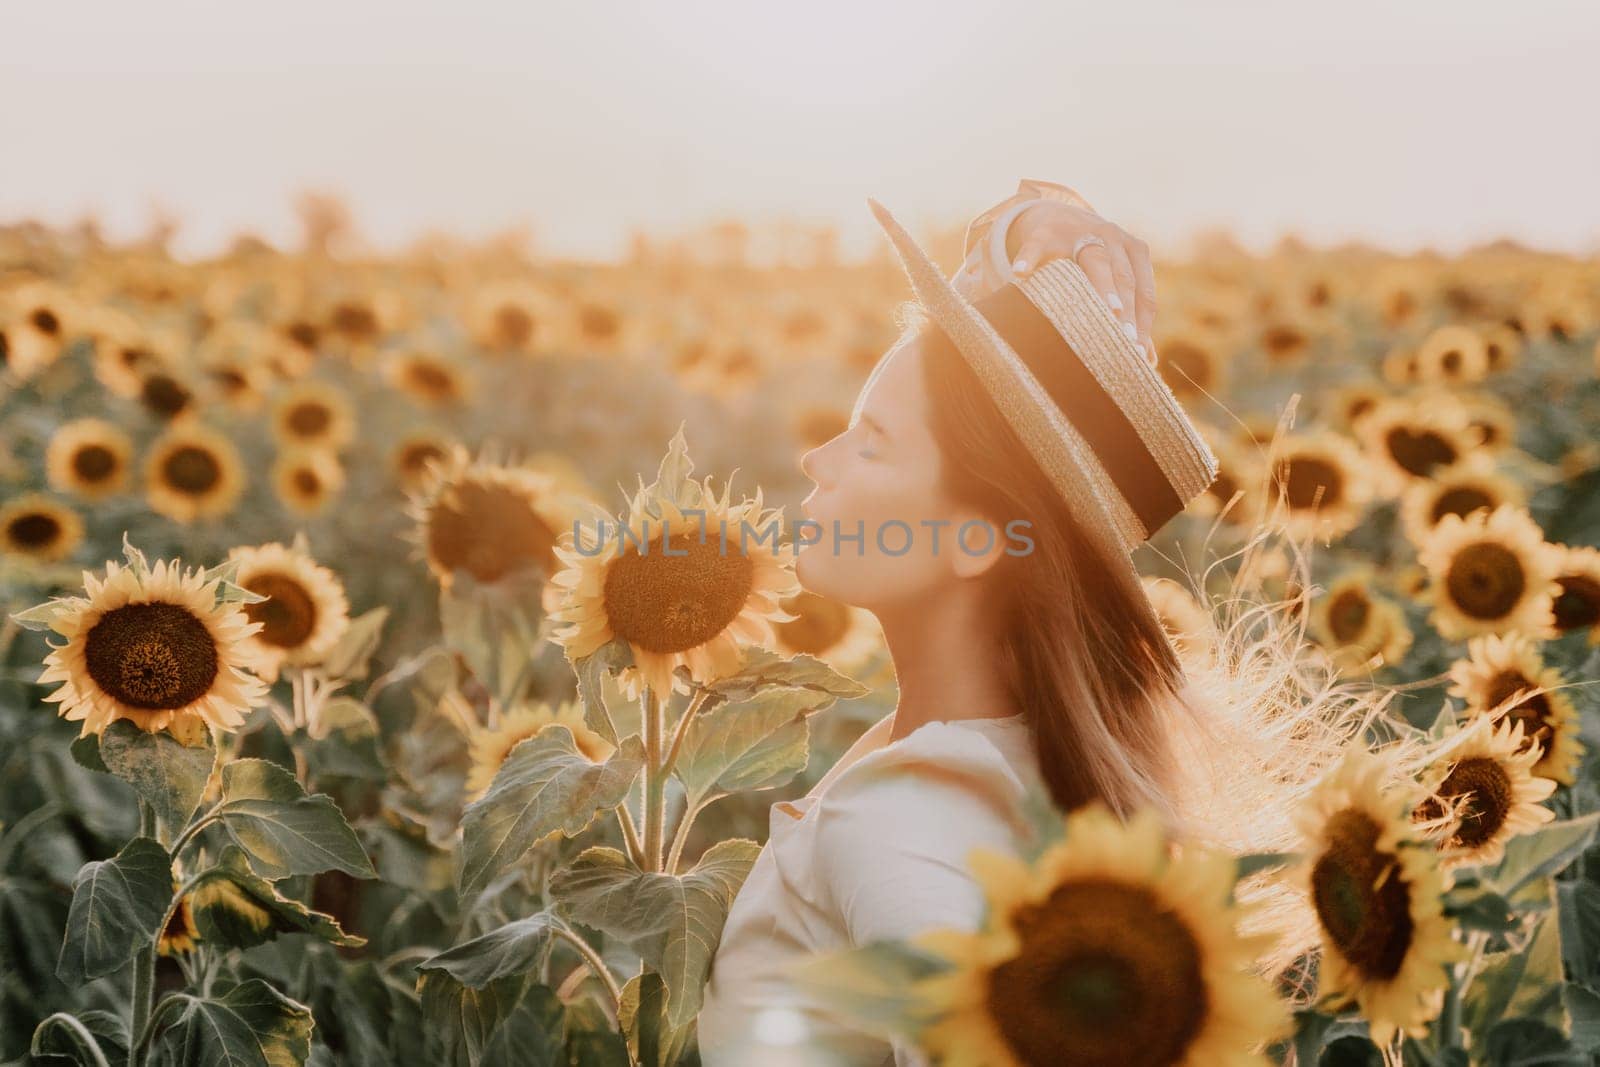 Woman in Sunflower Field: Happy girl in a straw hat posing in a vast field of sunflowers at sunset, enjoy taking picture outdoors for memories. Summer time. by panophotograph